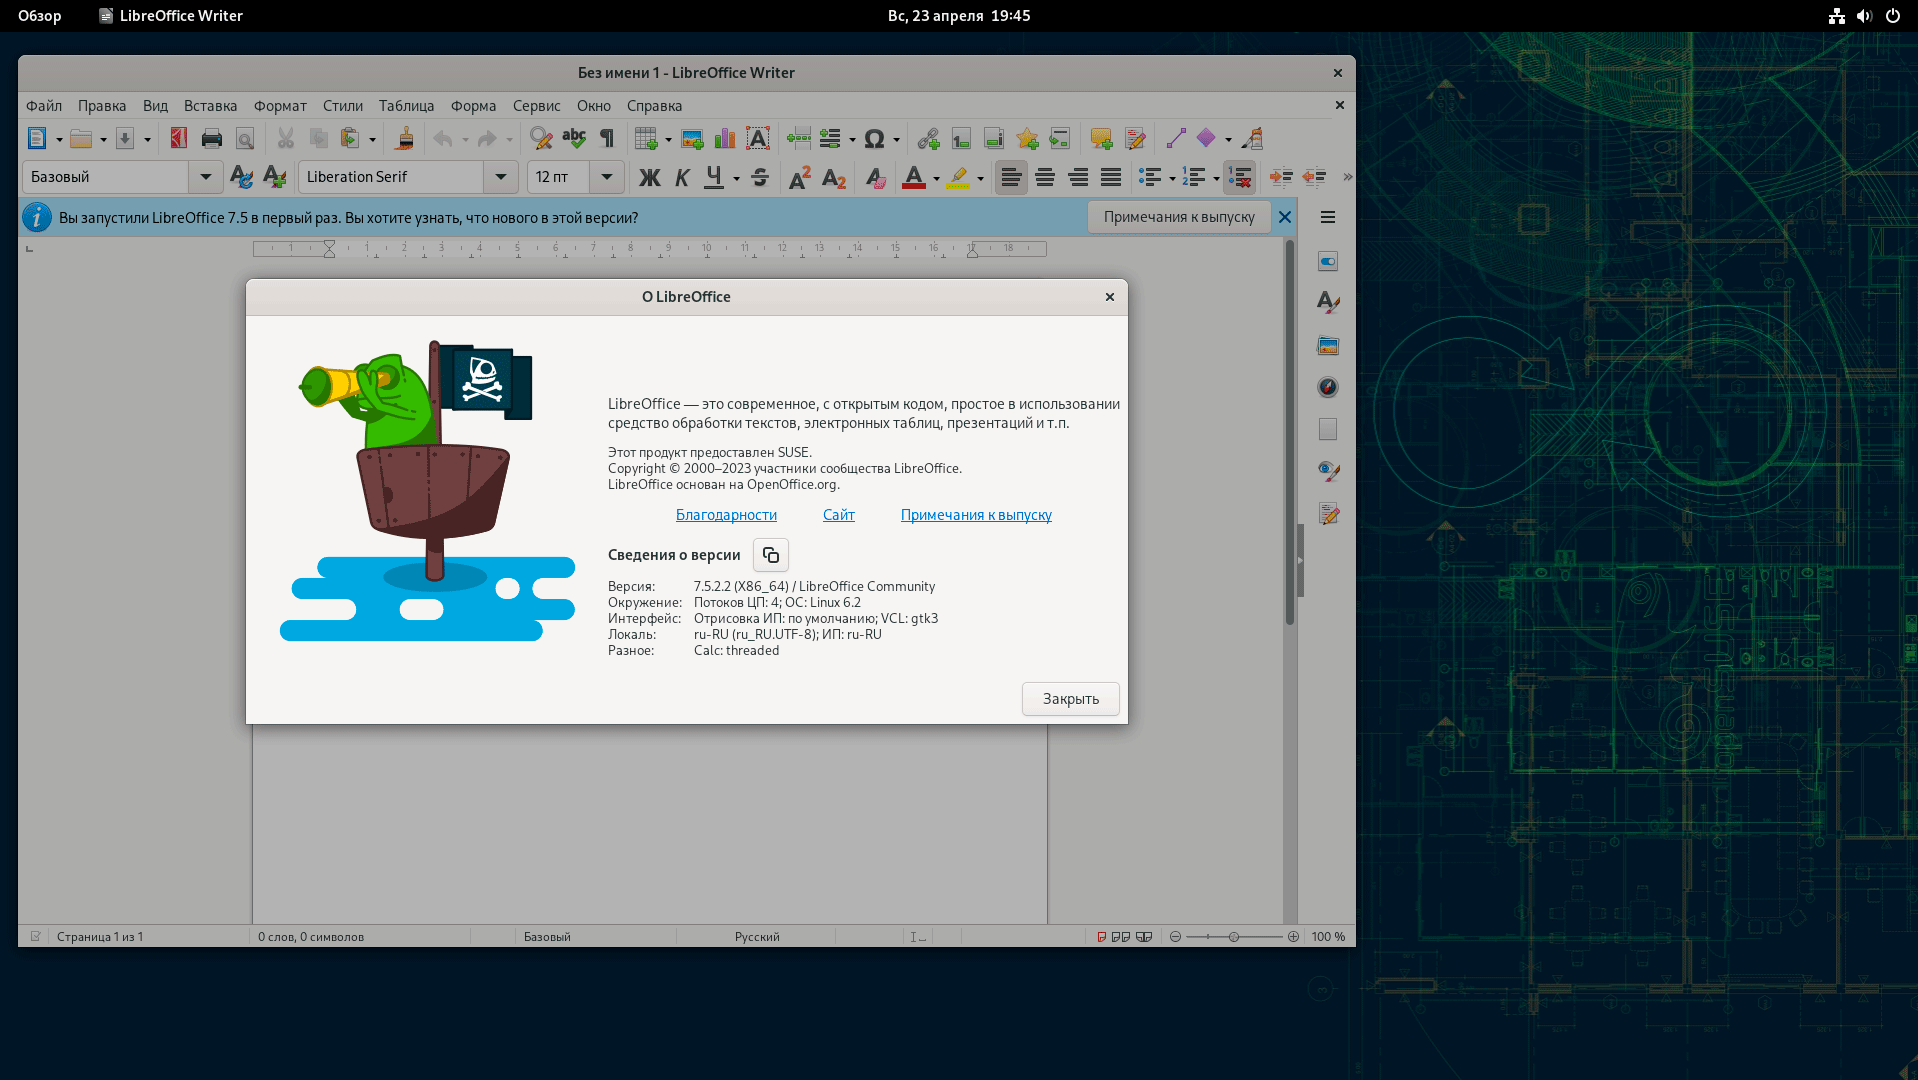 https://interface31.ru/tech_it/images/openSUSE-Leap-Tumbleweed-024.png